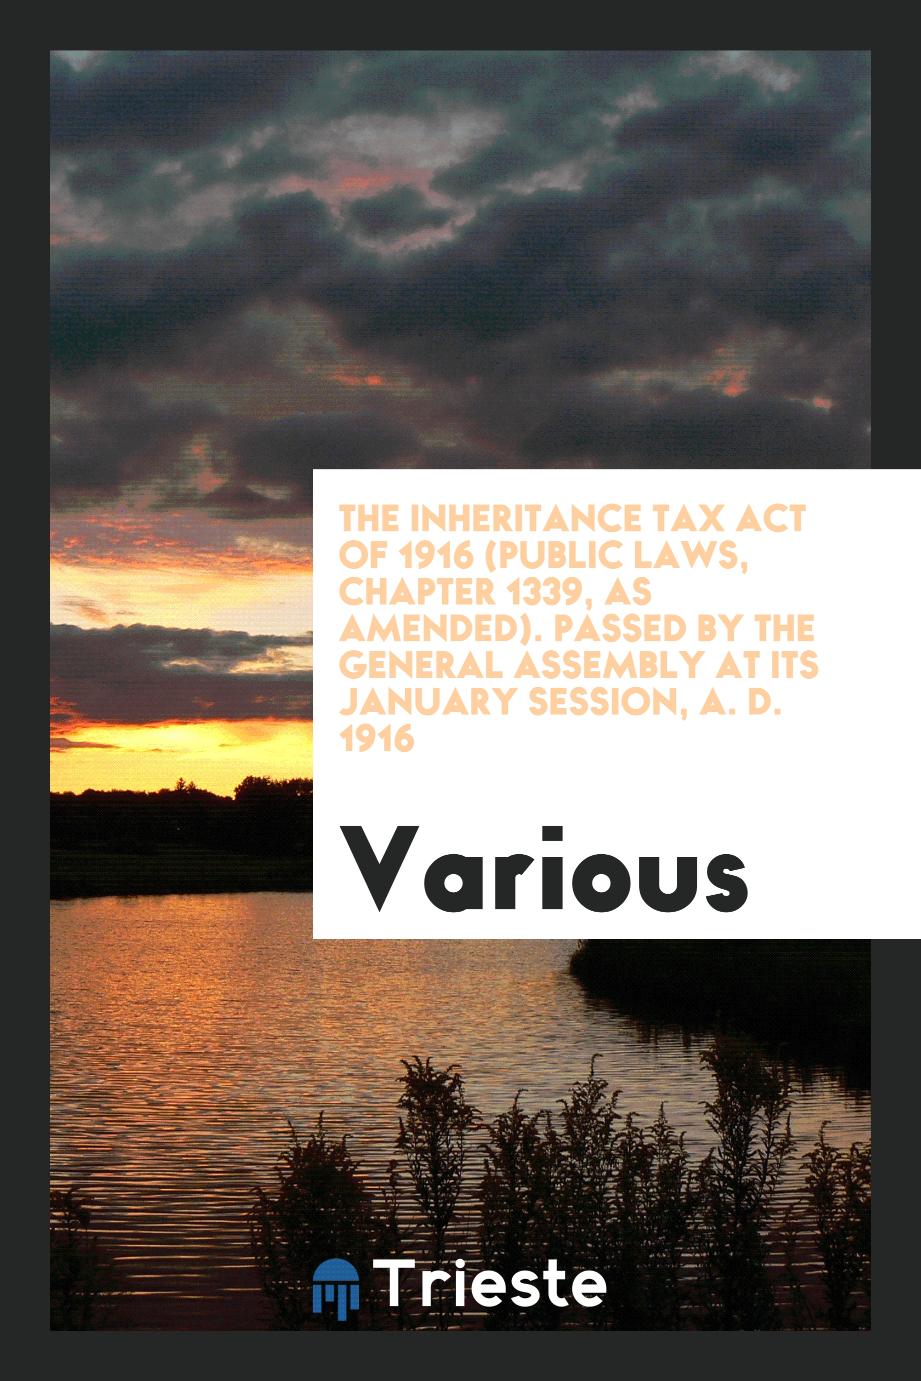 The inheritance tax act of 1916 (Public laws, chapter 1339, as amended). Passed by the general assembly at its January session, A. D. 1916